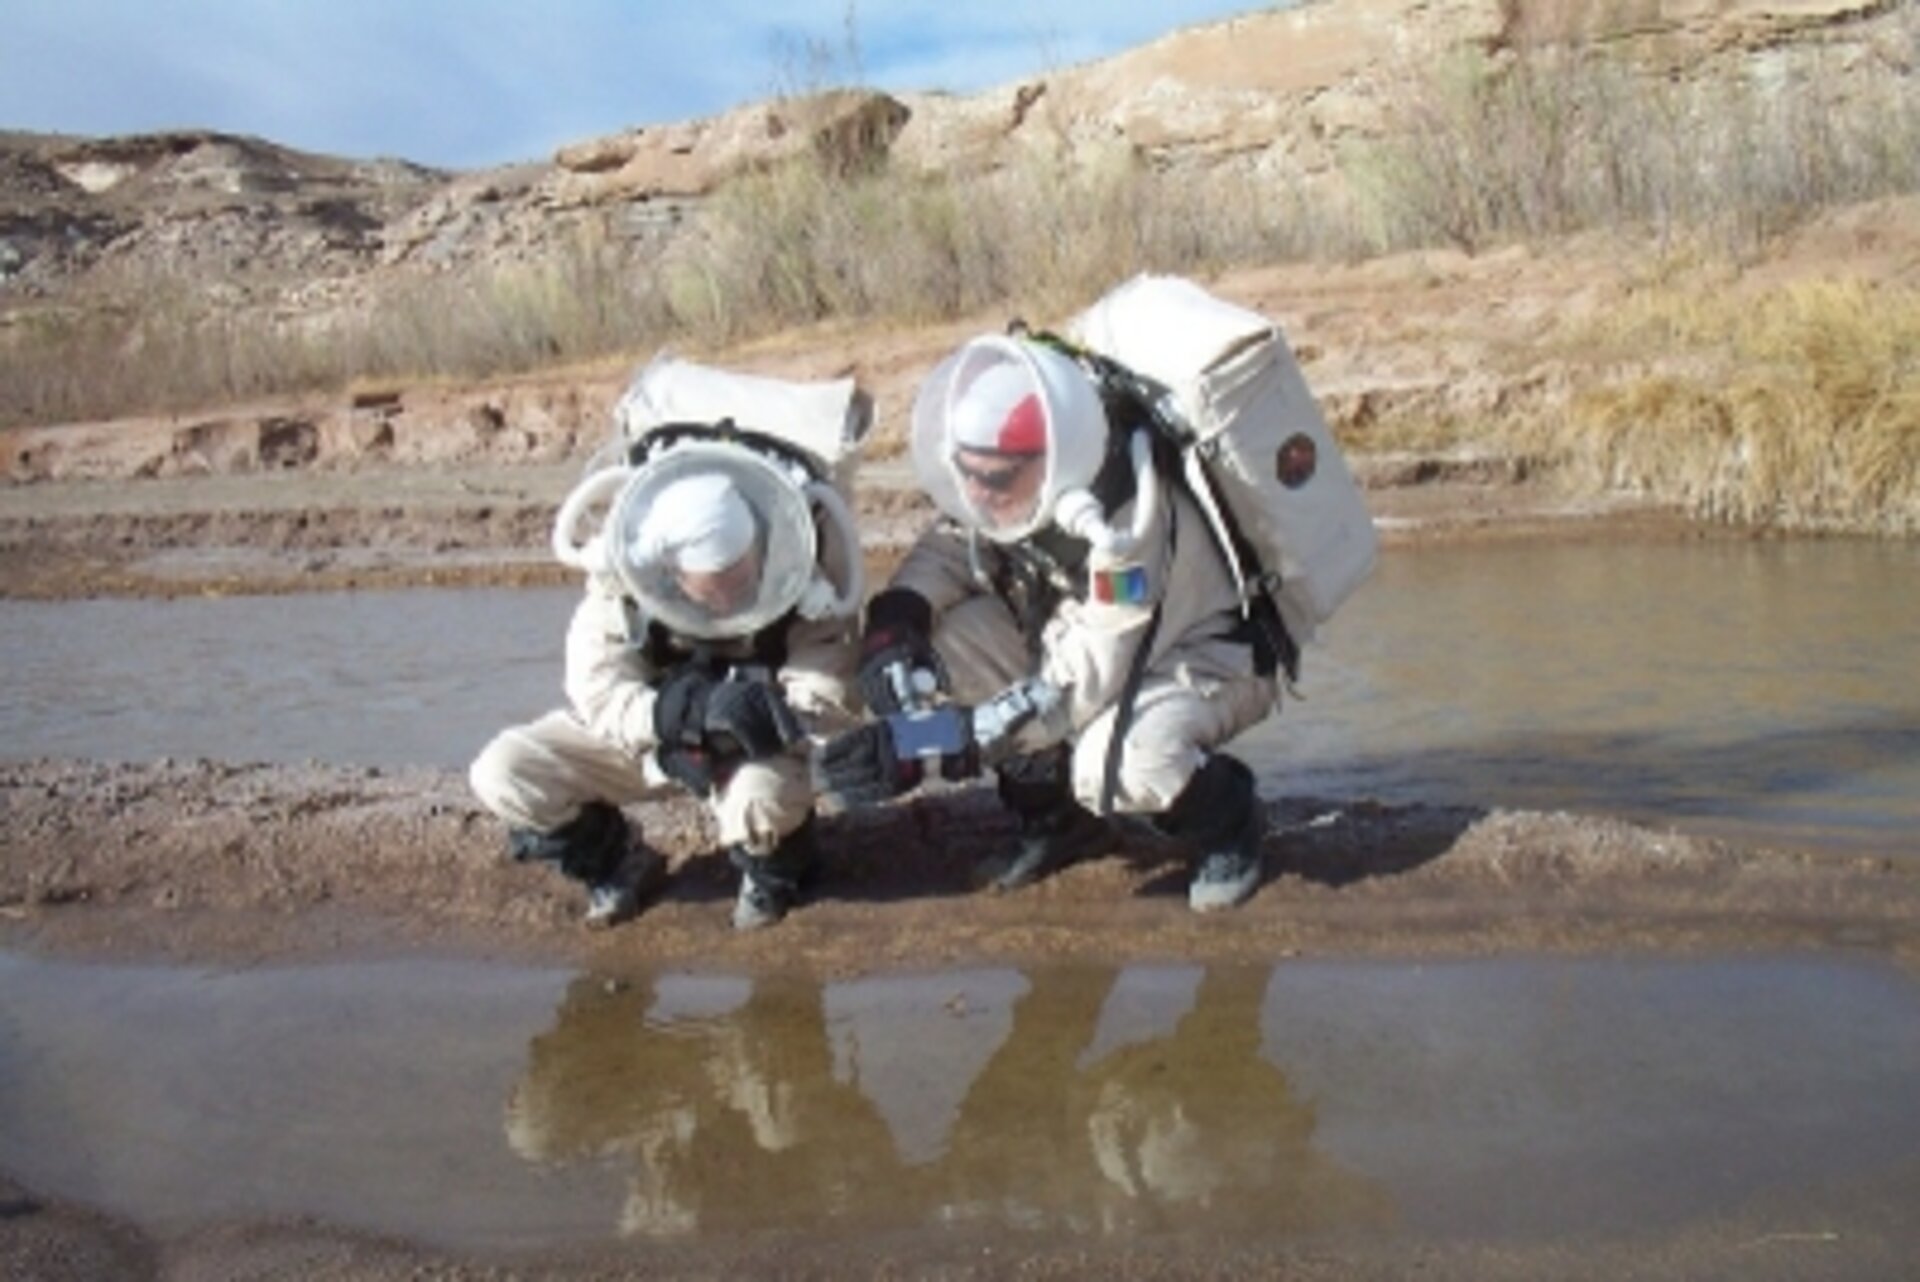 Andrea Fori and Vladimir Pletser collecting a mud sample at the river